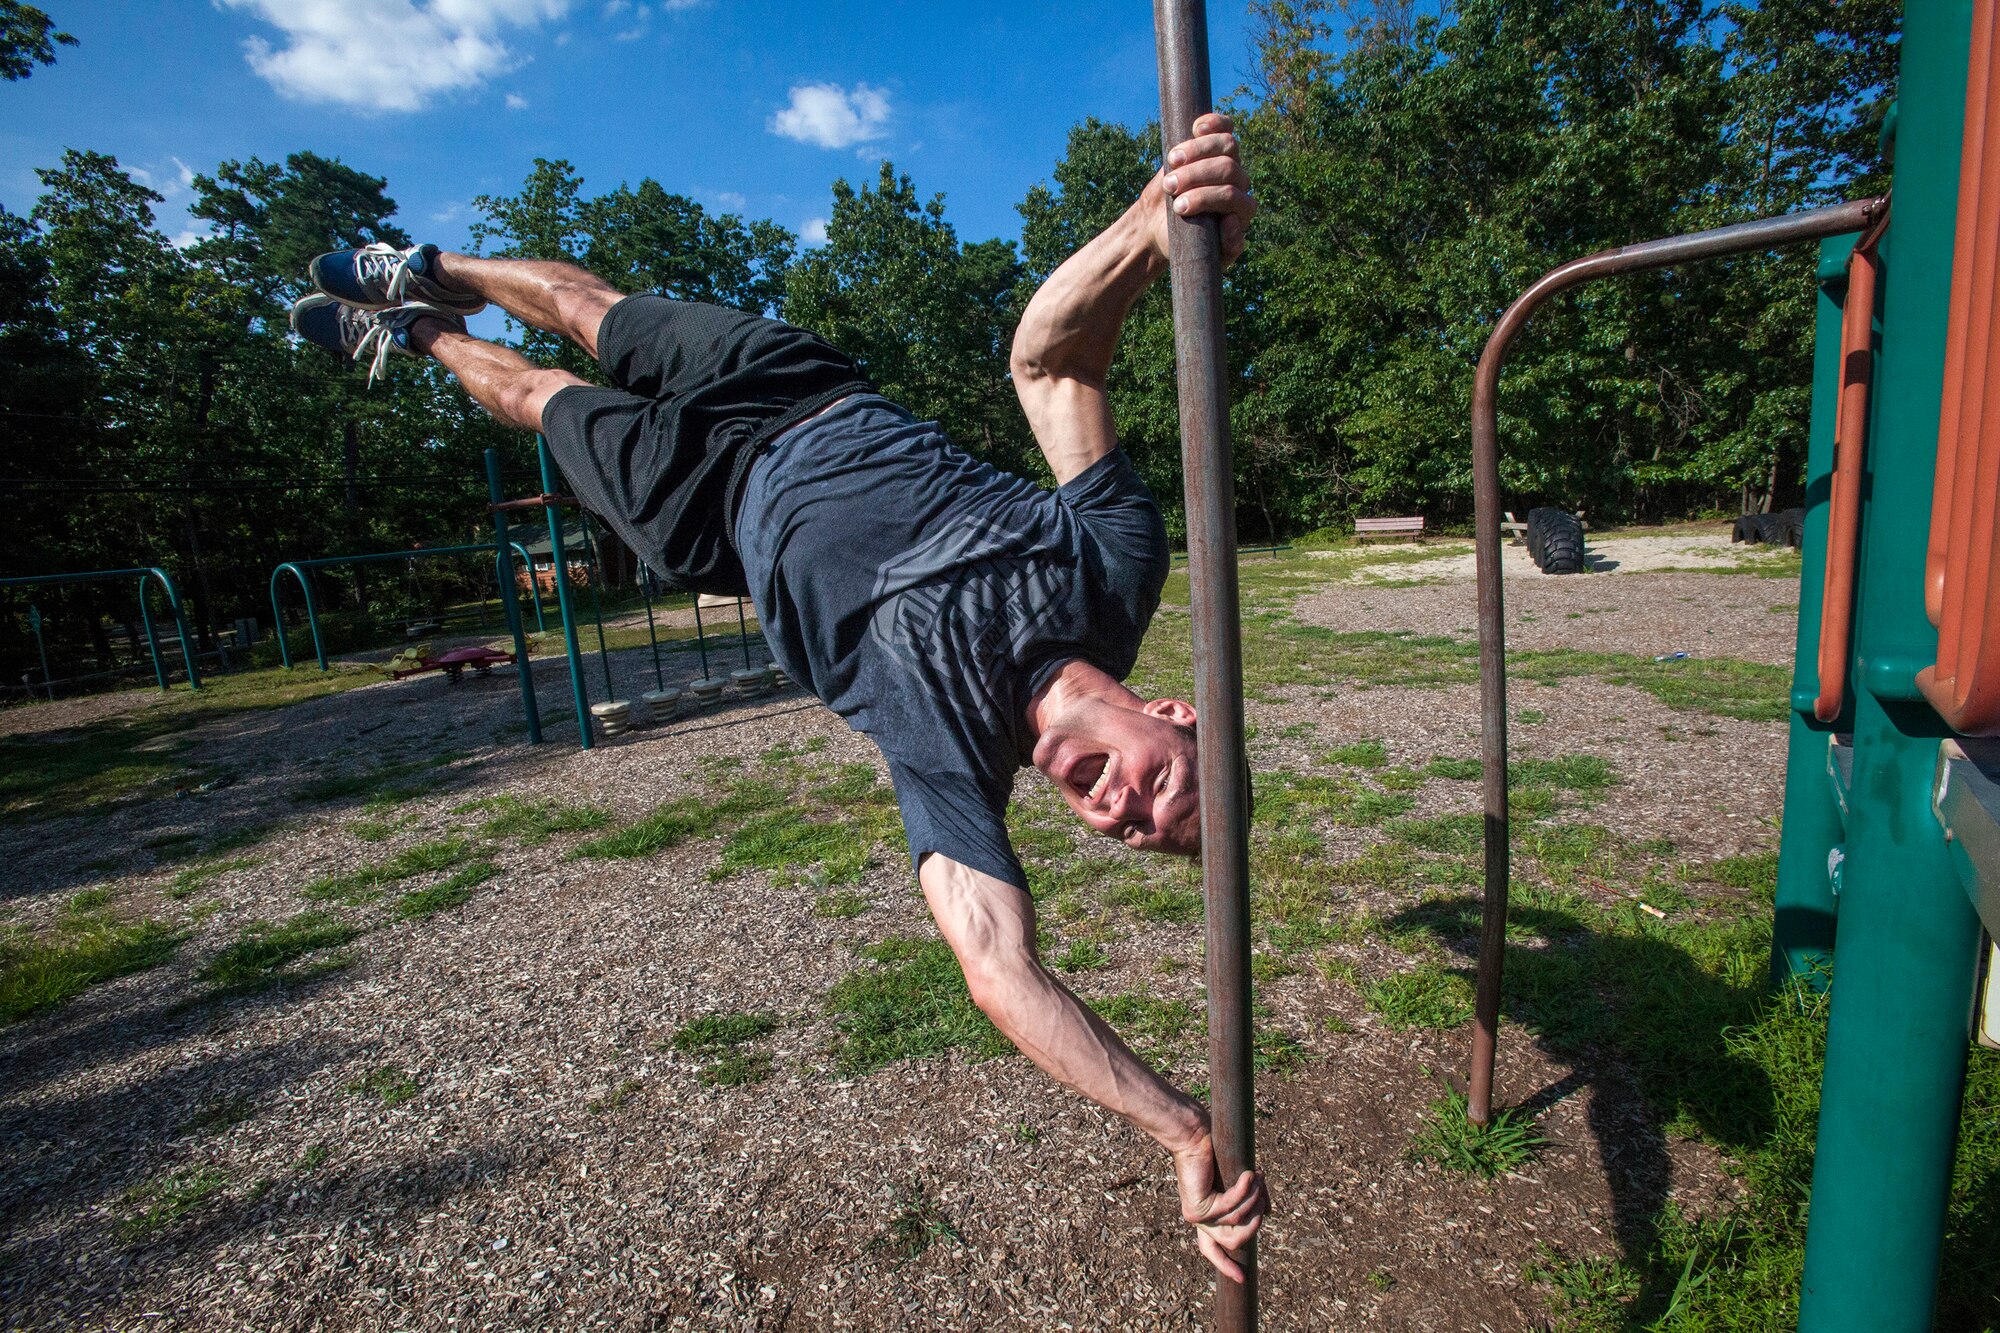 Tech. Sgt. Justin B. Gielski performs his human flag pose while training to compete on the TV show “American Ninja Warrior” at a playground near his home in Medford, N.J., Aug. 21, 2015. Gielski placed fifth in the all-military city final on the TV show and advanced to the finals in Las Vegas. Gielski is a loadmaster with the 150th Special Operations Squadron, 108th Wing, New Jersey Air National Guard, located at Joint Base McGuire-Dix-Lakehurst, N.J. (U.S. Air National Guard photo by Master Sgt. Mark C. Olsen/Released)